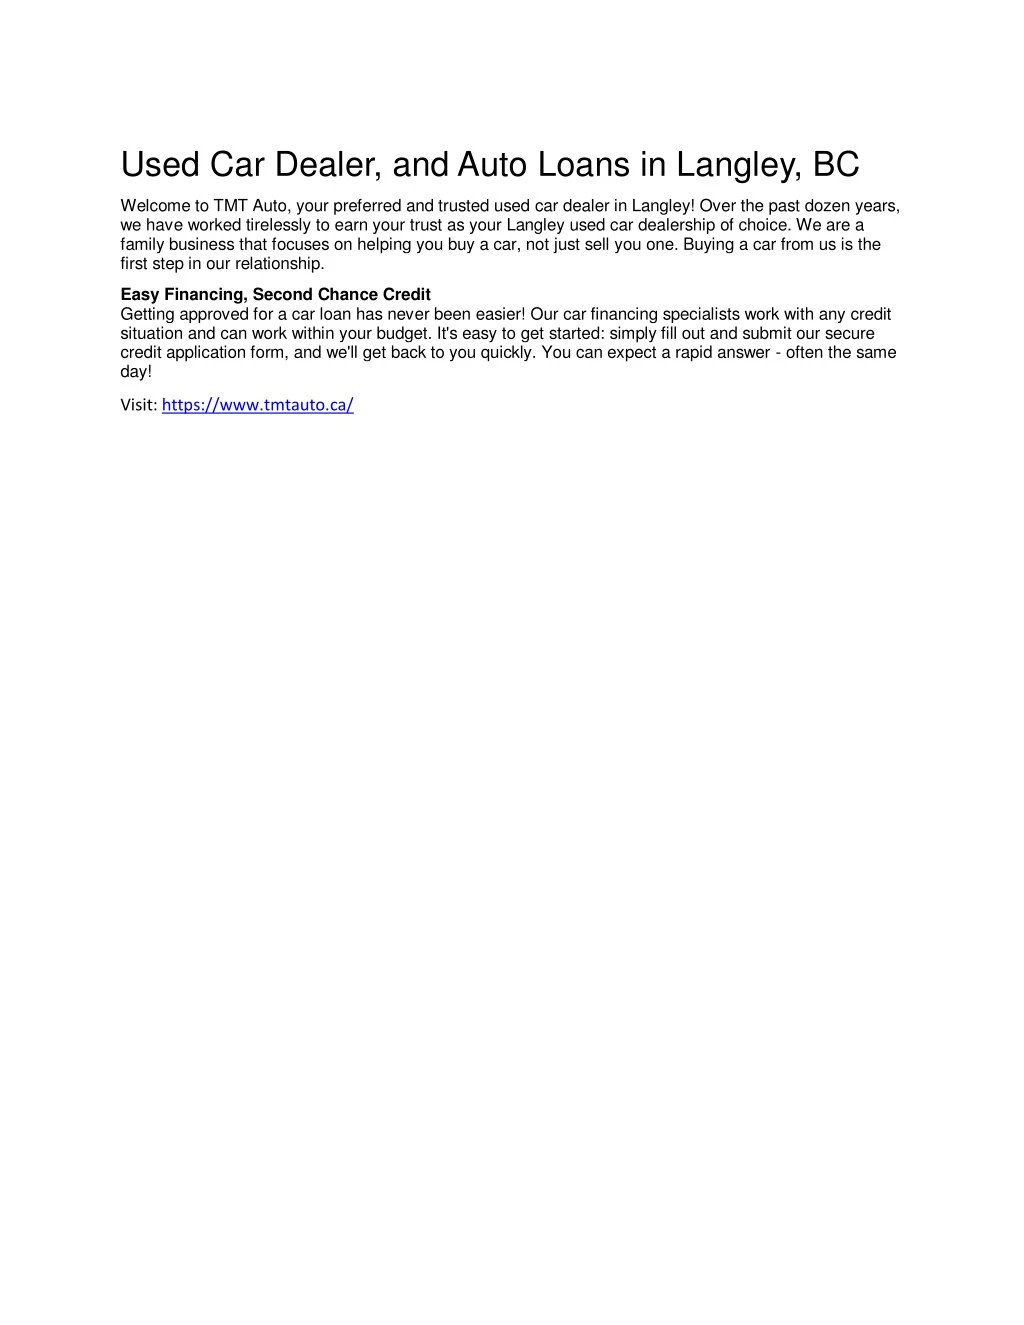 used car dealer and auto loans in langley bc